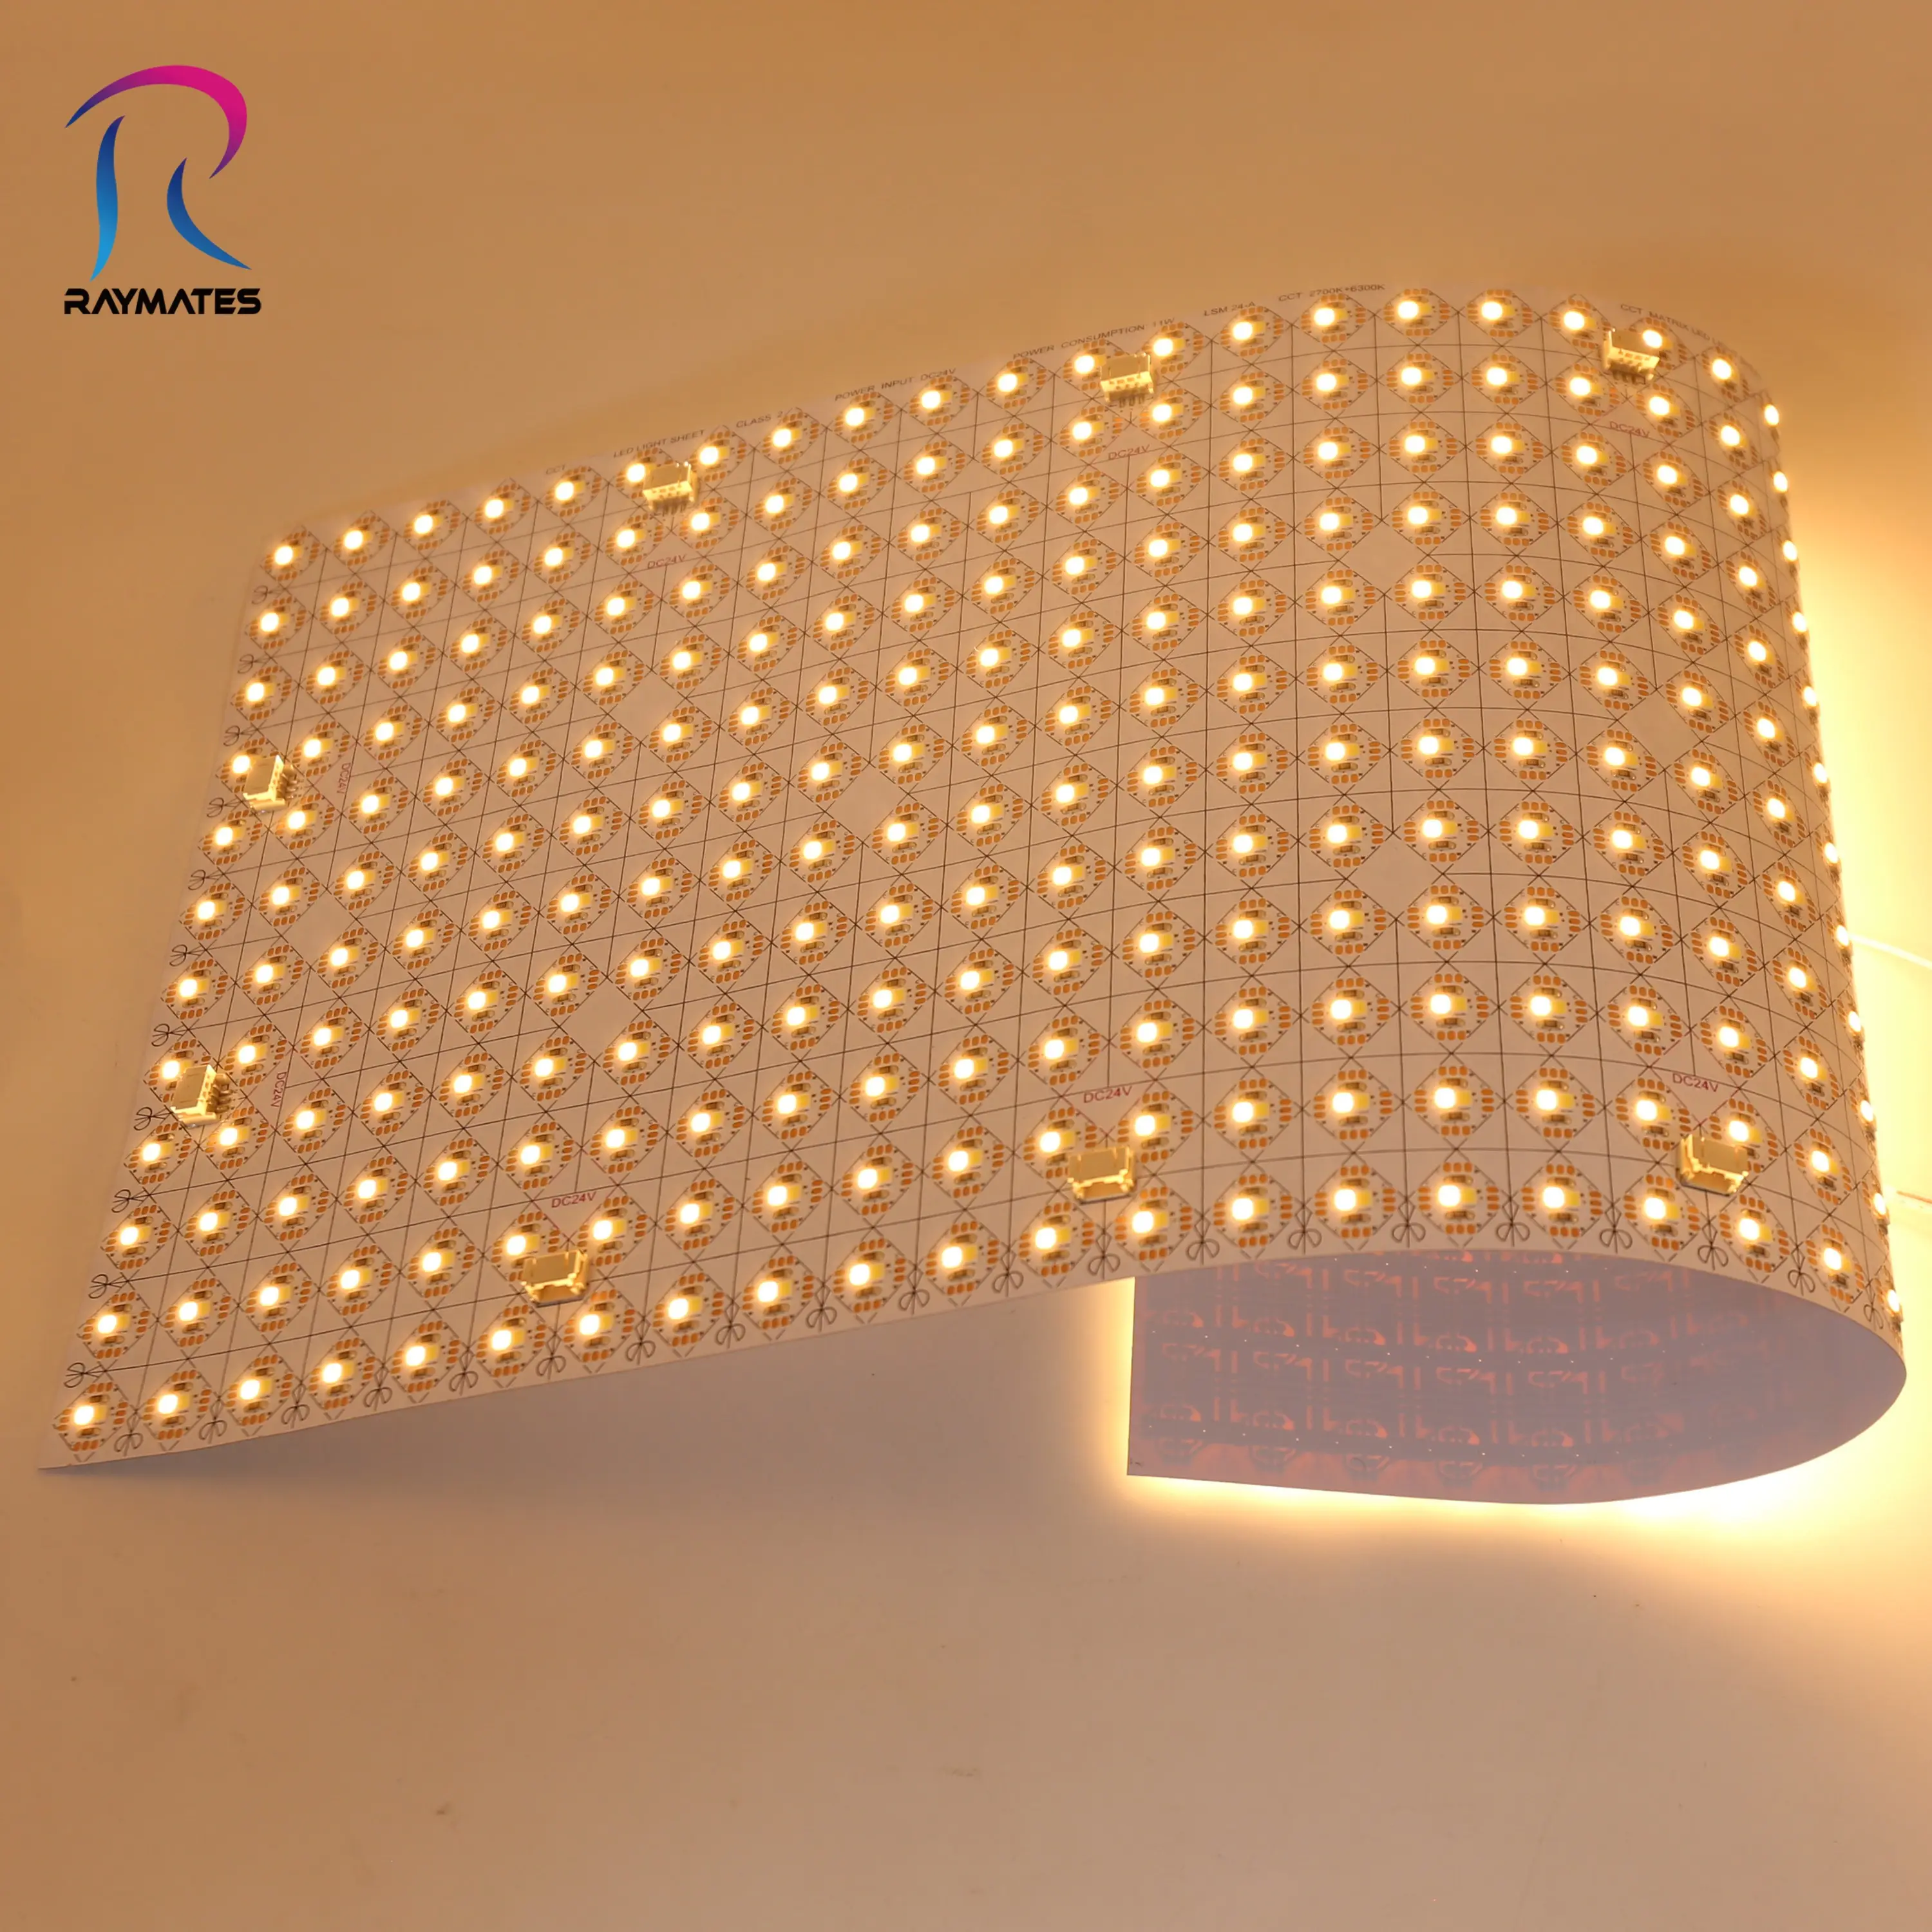 New Tunable CCT LED Panel Sheet DC24V Flexible LED Sheet Cuttable Dimmable For Marble Countertop